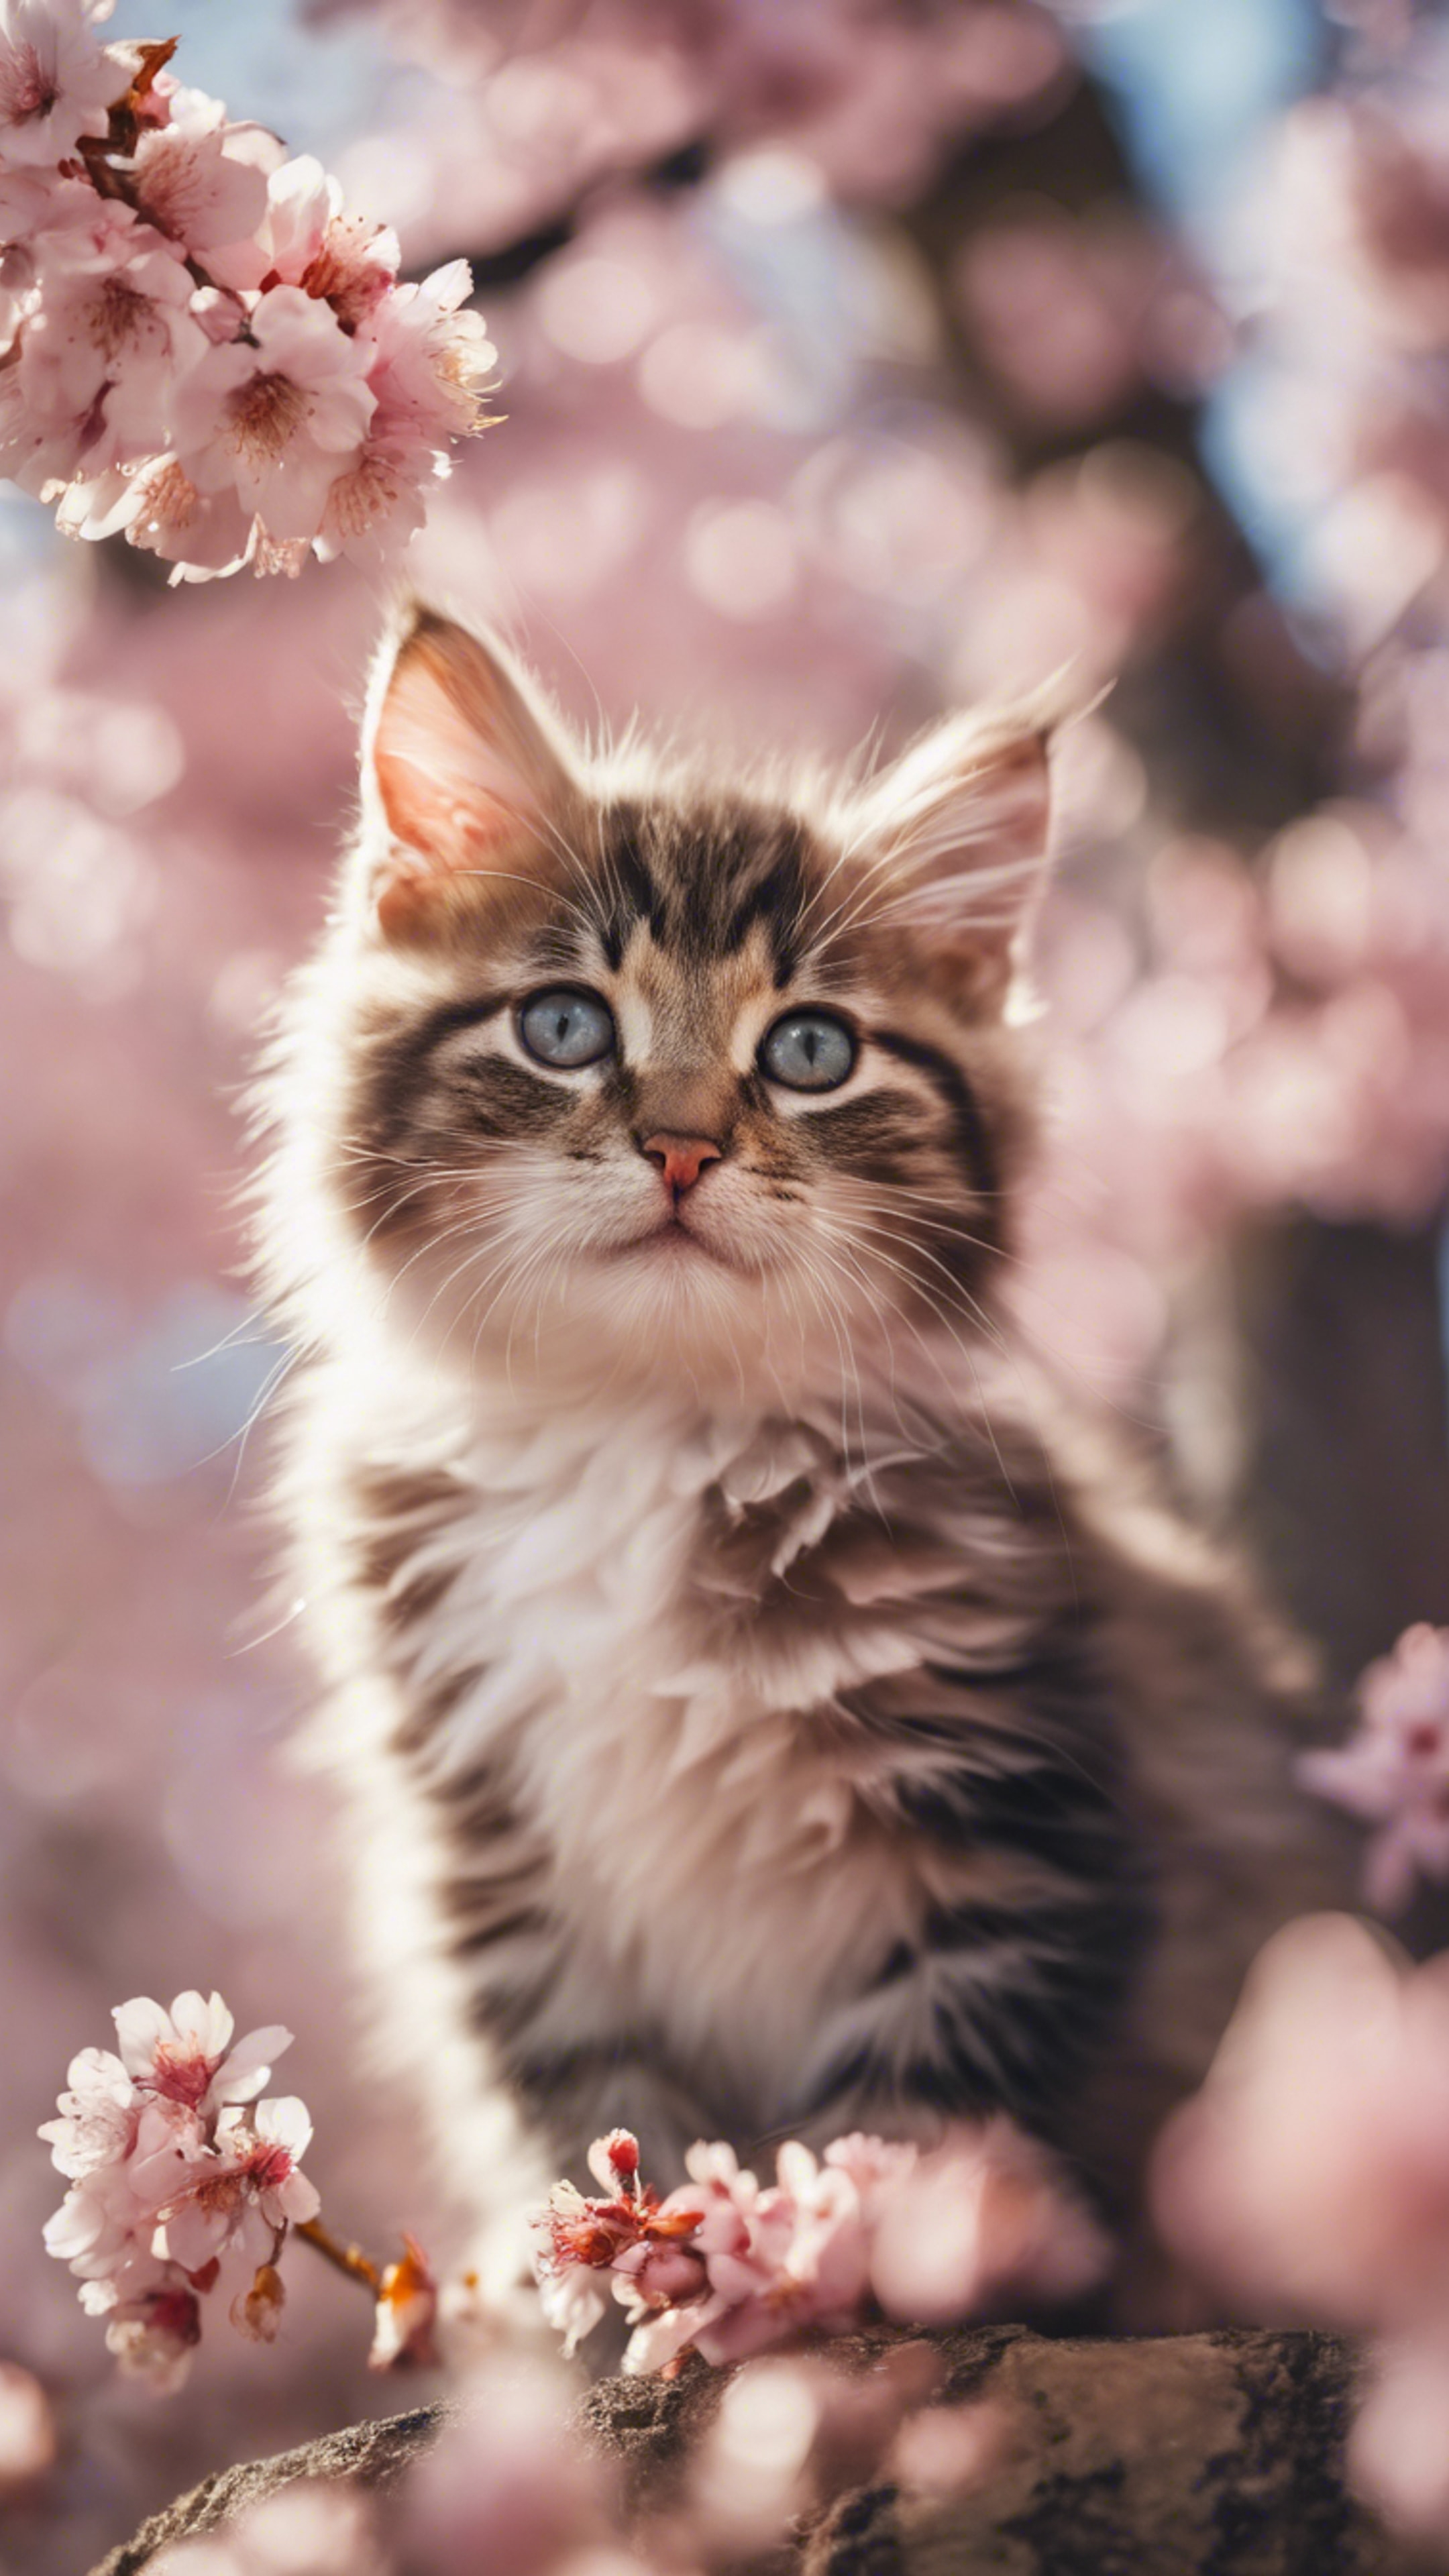 A cherry blossom tree in full bloom as the backdrop to a playful kitten in spring. Wallpaper[56e1c1b9132e46d98bd1]